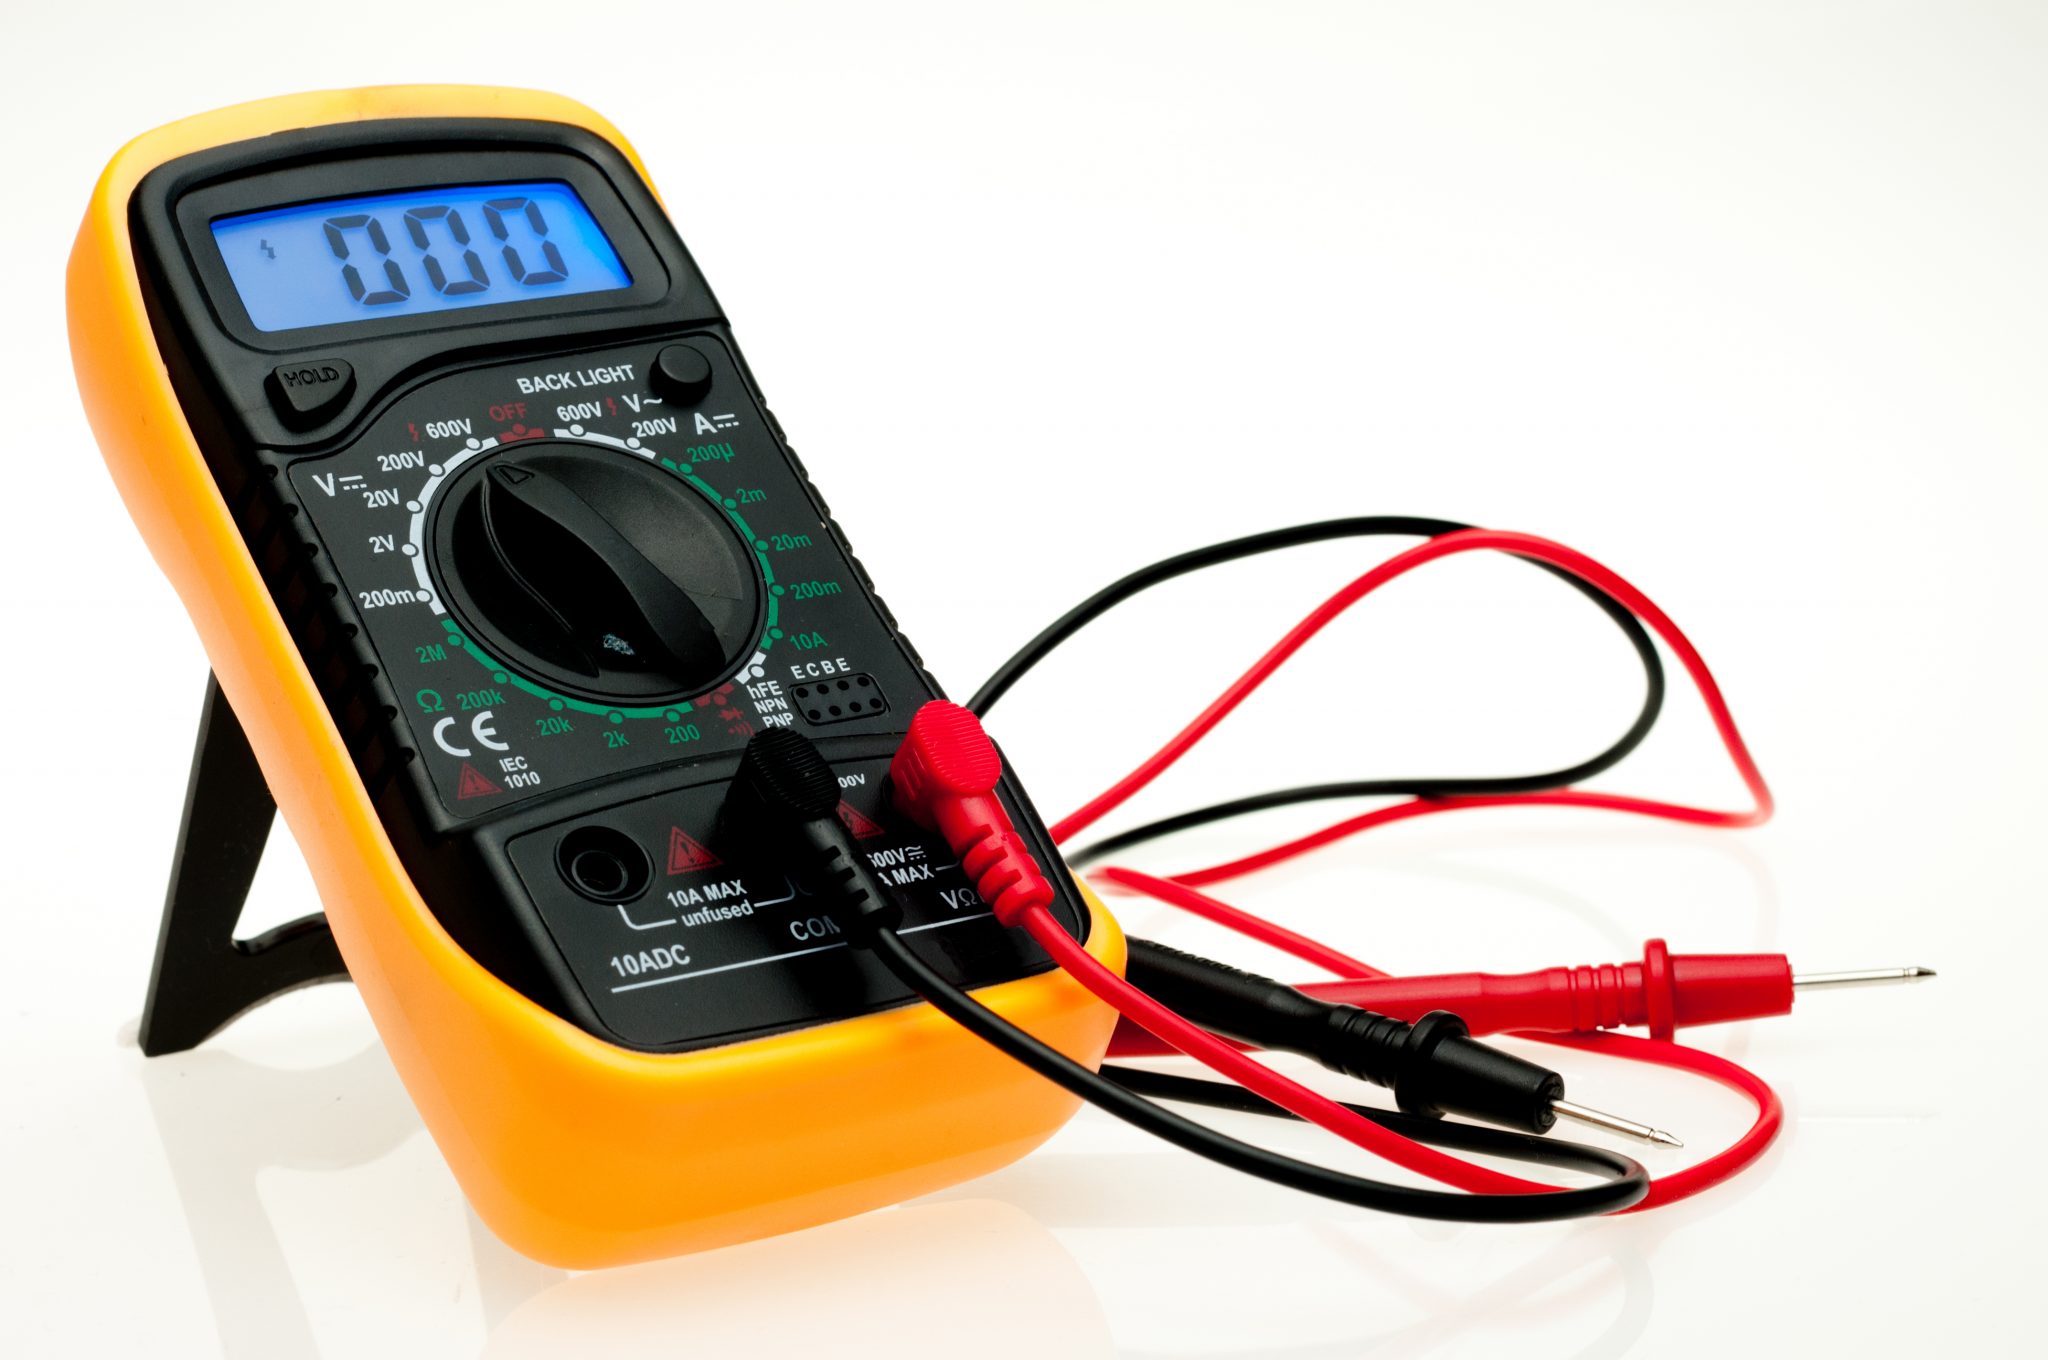 Digital multimeter is the one of the equipment to diagnose the P0449 OBD2 code.